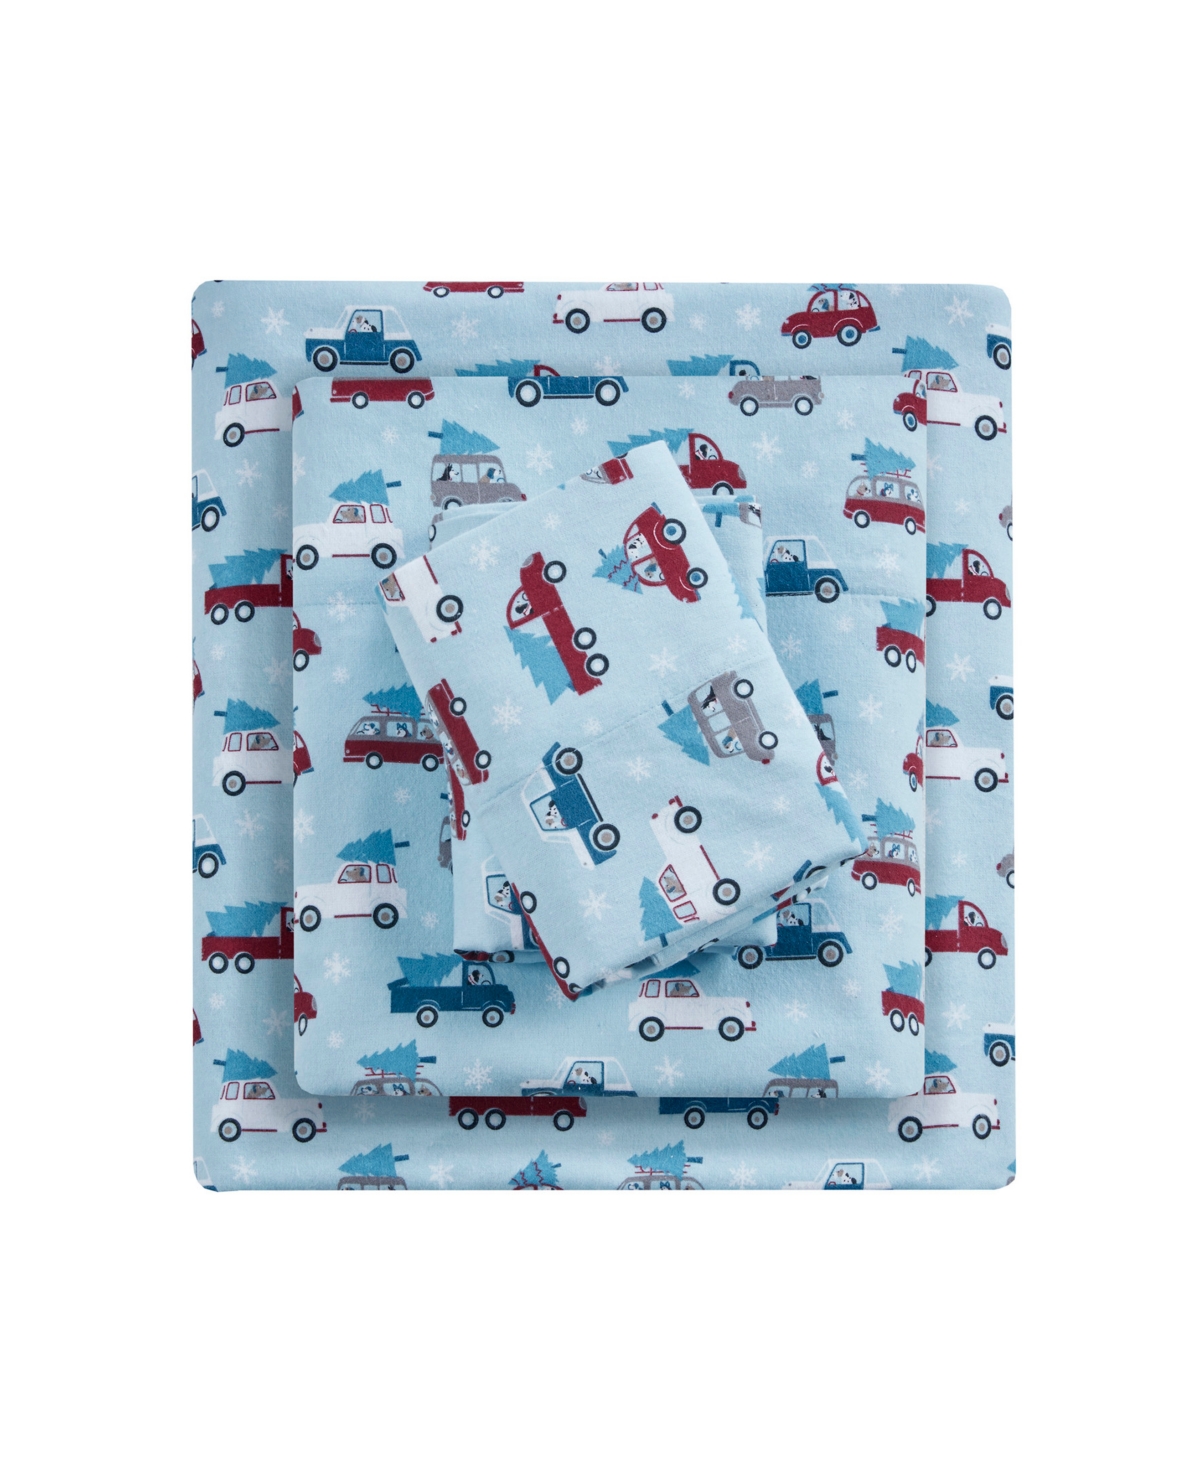 Sleep Philosophy True North By  Novelty Printed Cotton Flannel 4-pc. Sheet Set, Full Bedding In Blue Cars